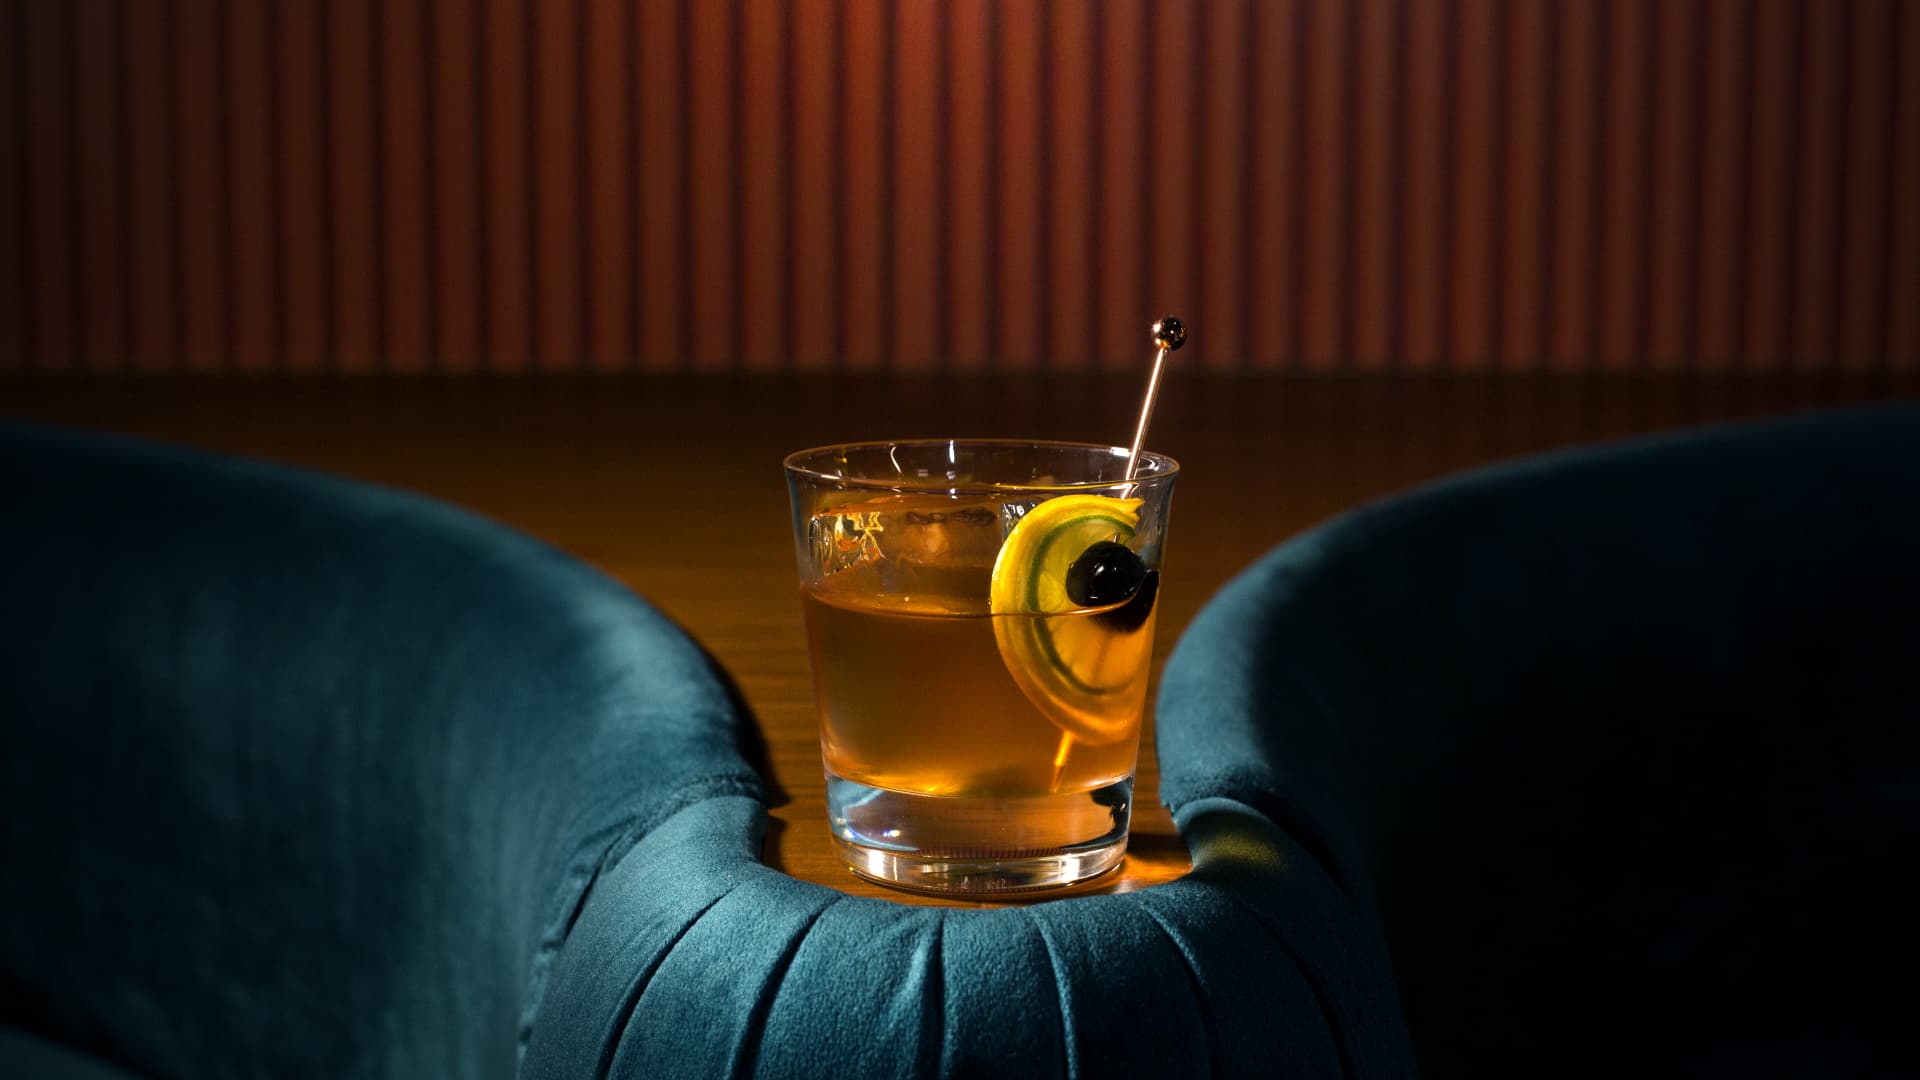 An Old Fashioned, made with sugar sourced from Japan's Hateruma island, at Singapore's No. 2-ranked Jigger & Pony.